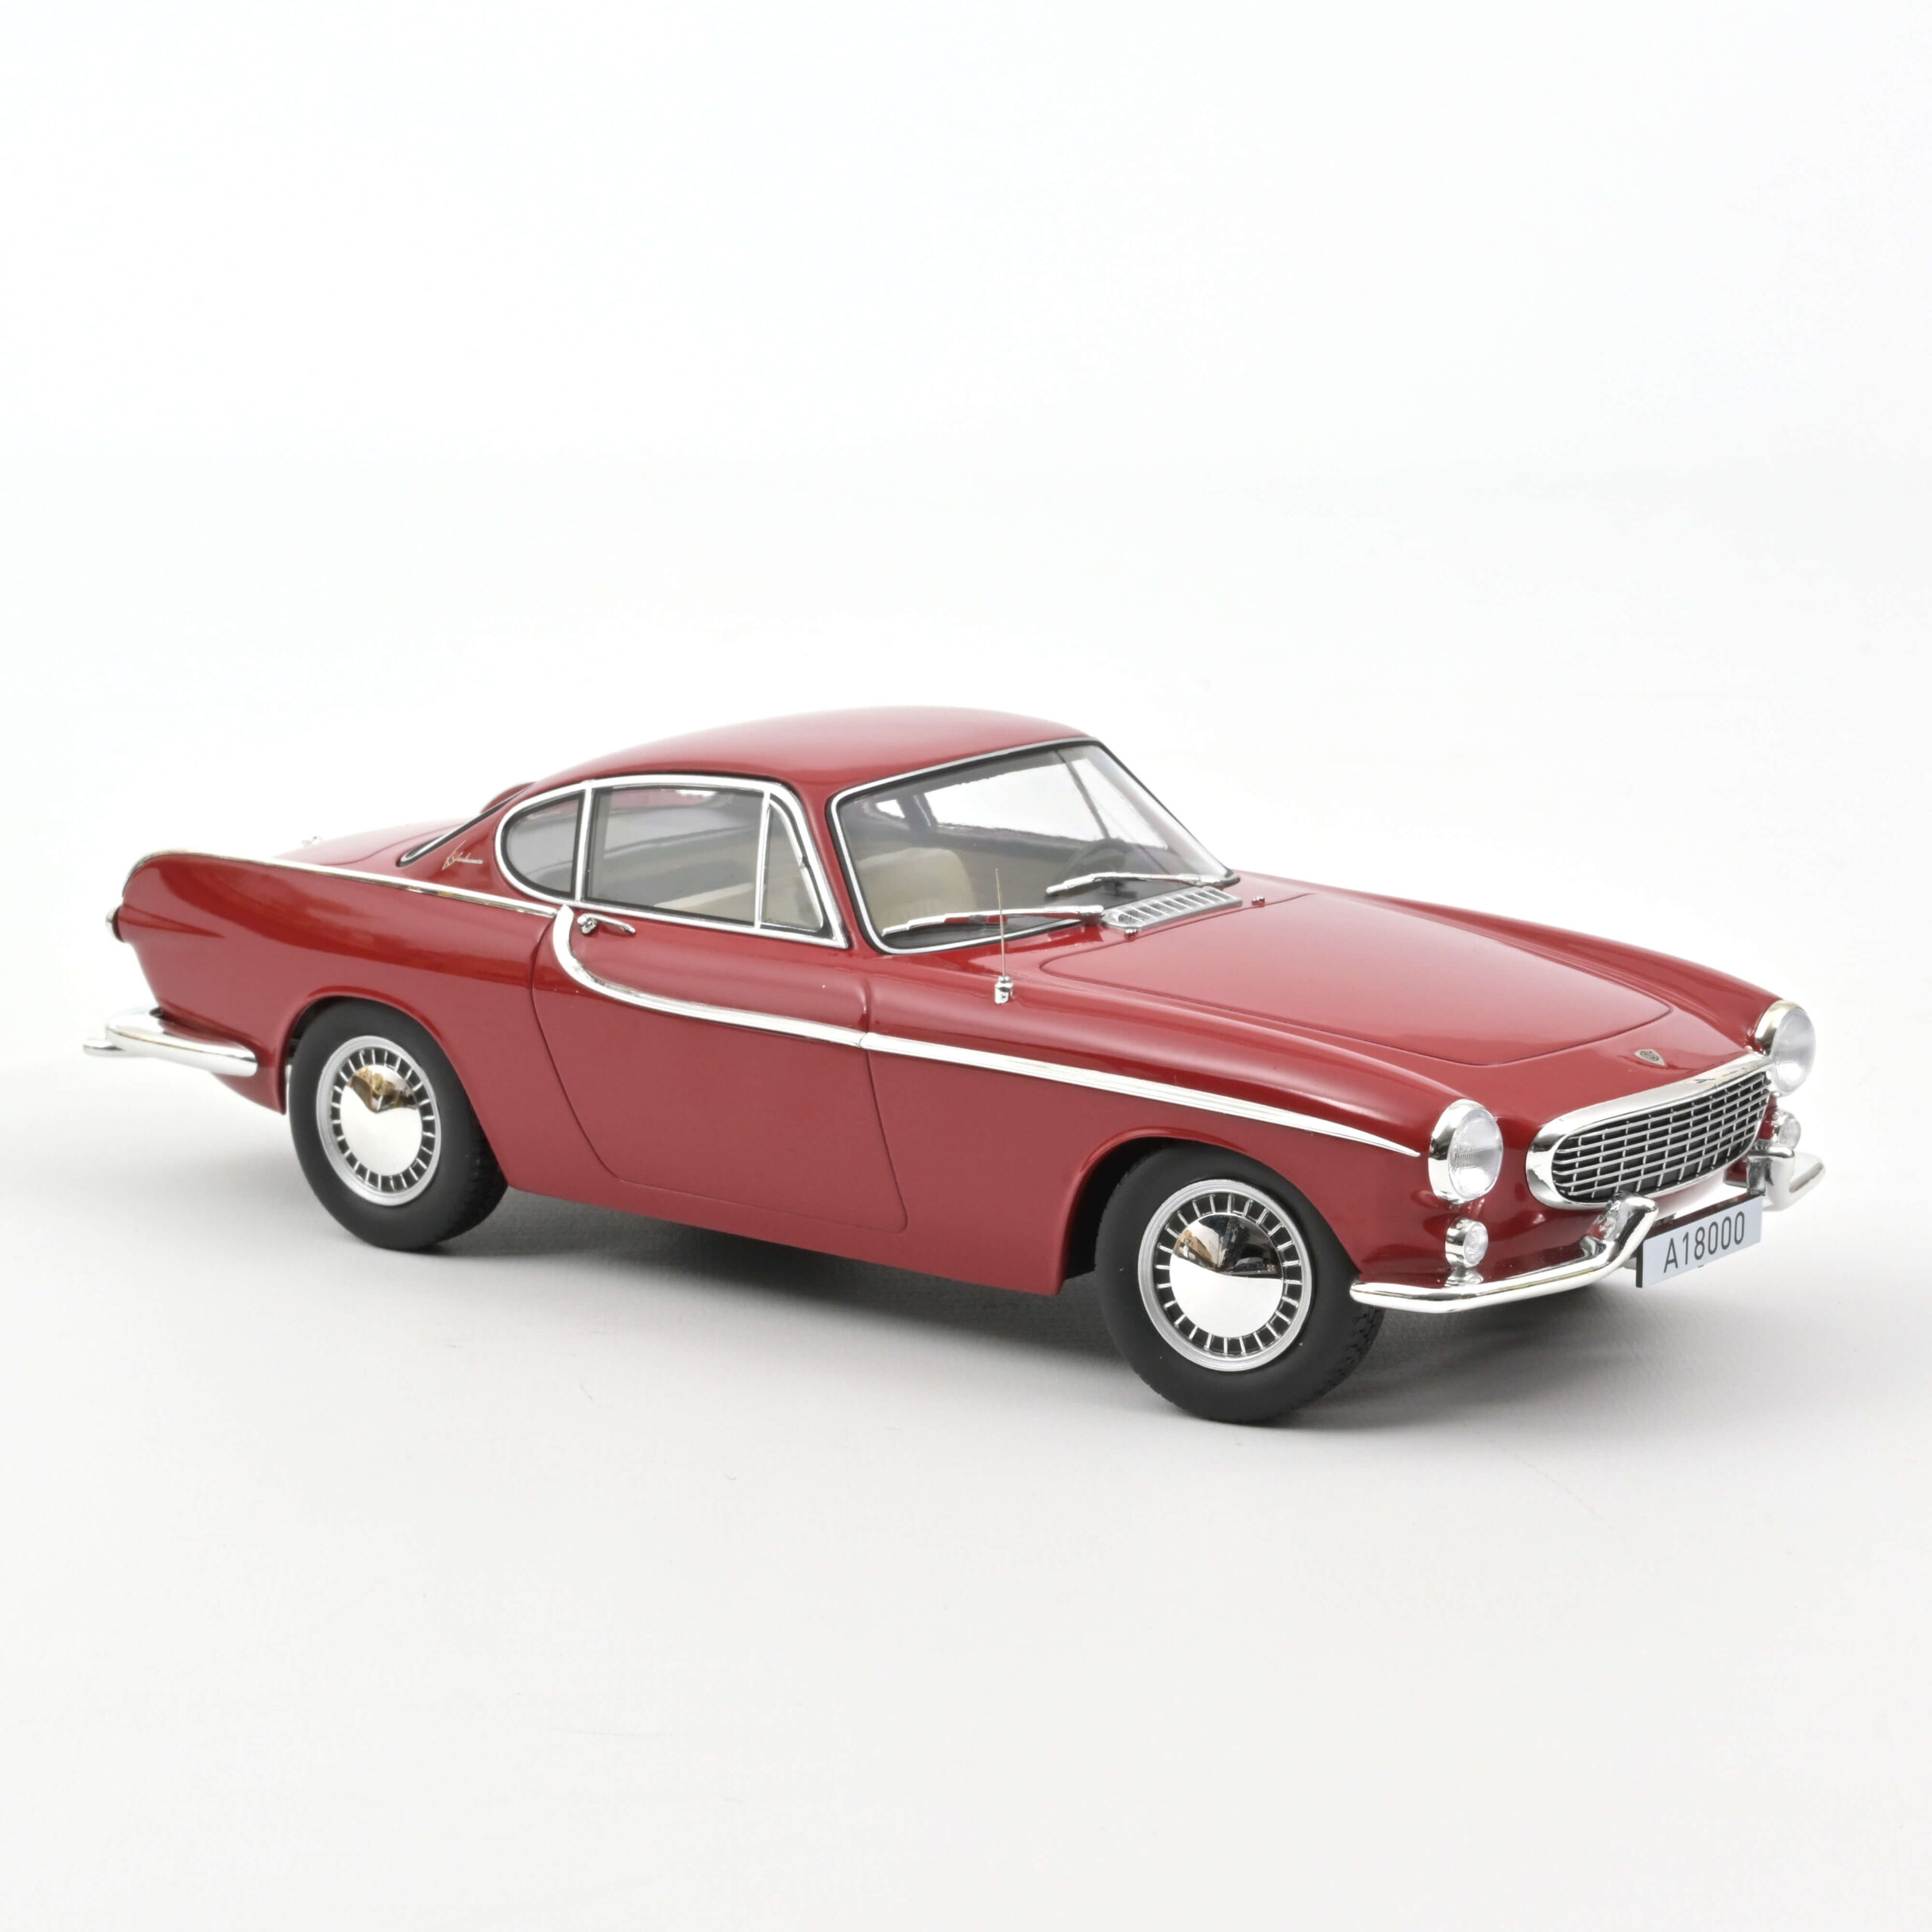 Volvo P1800 1961 – Red